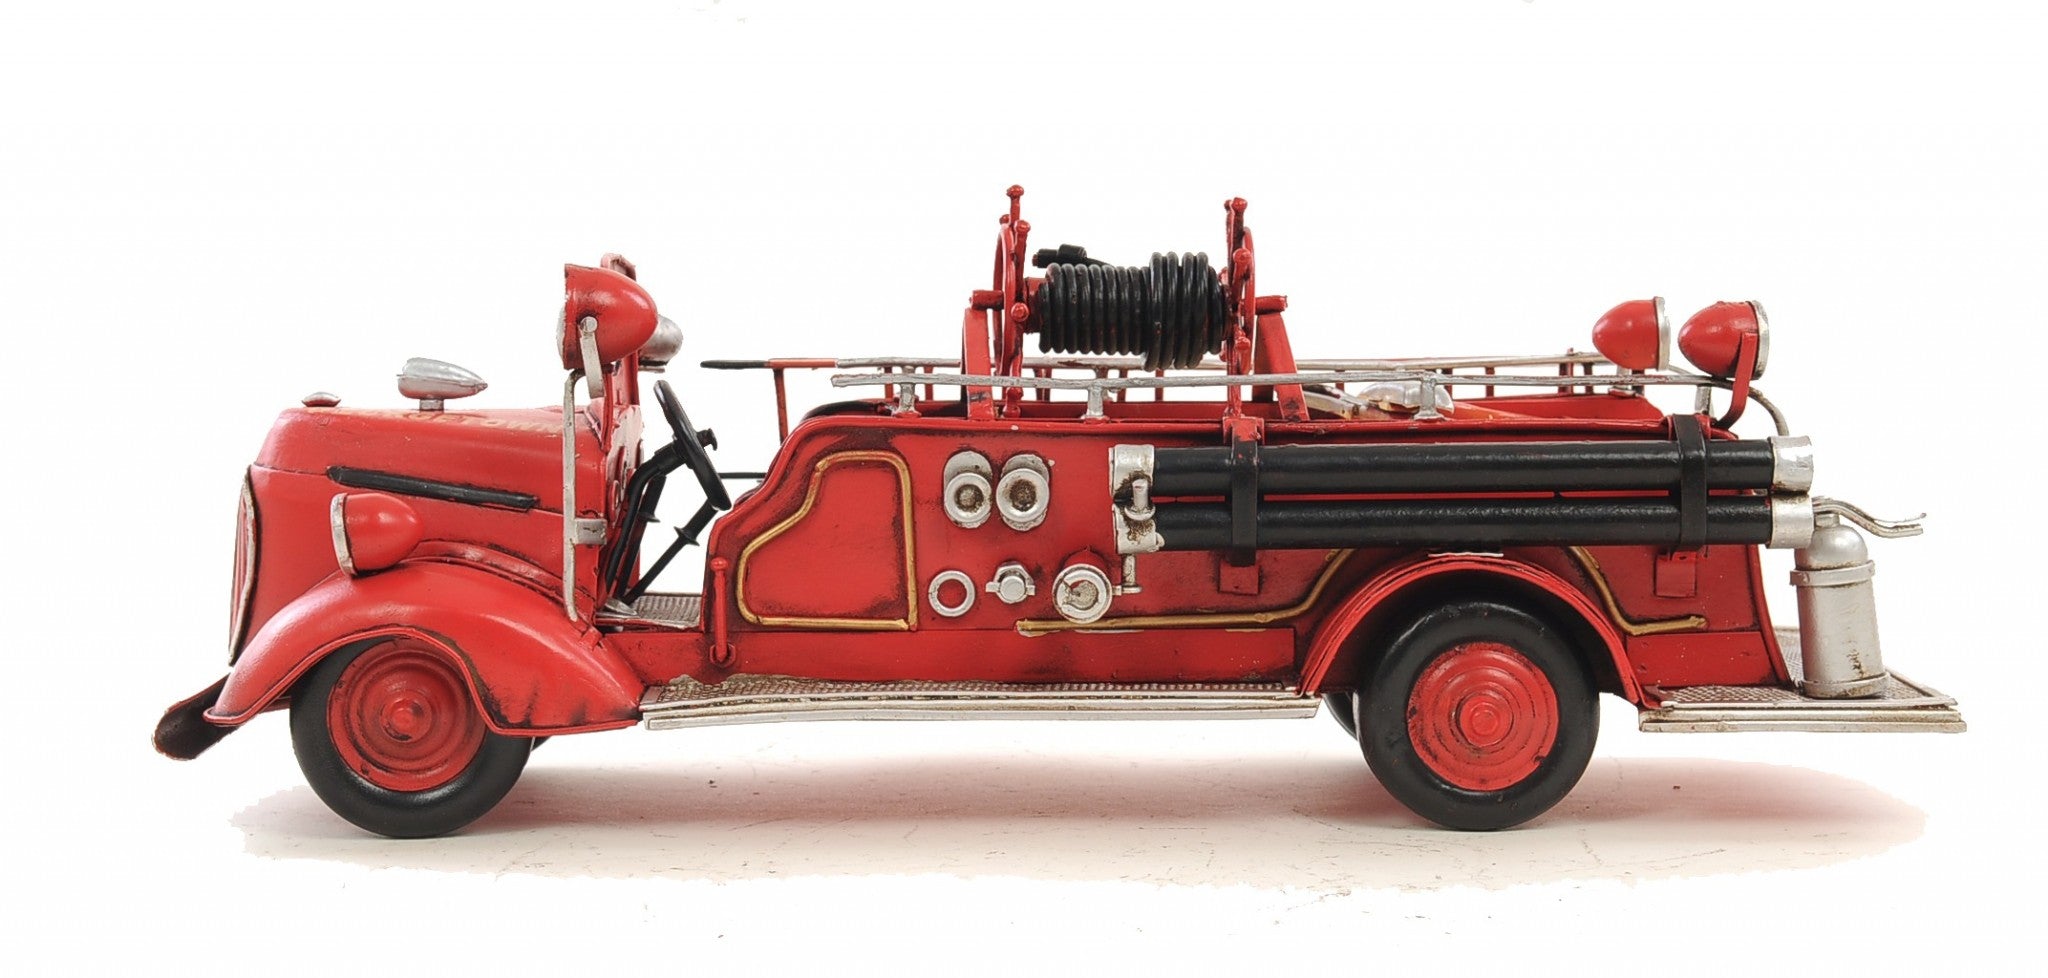 c1938 Ford Red Fire Engine Sculpture - Tuesday Morning-Sculptures